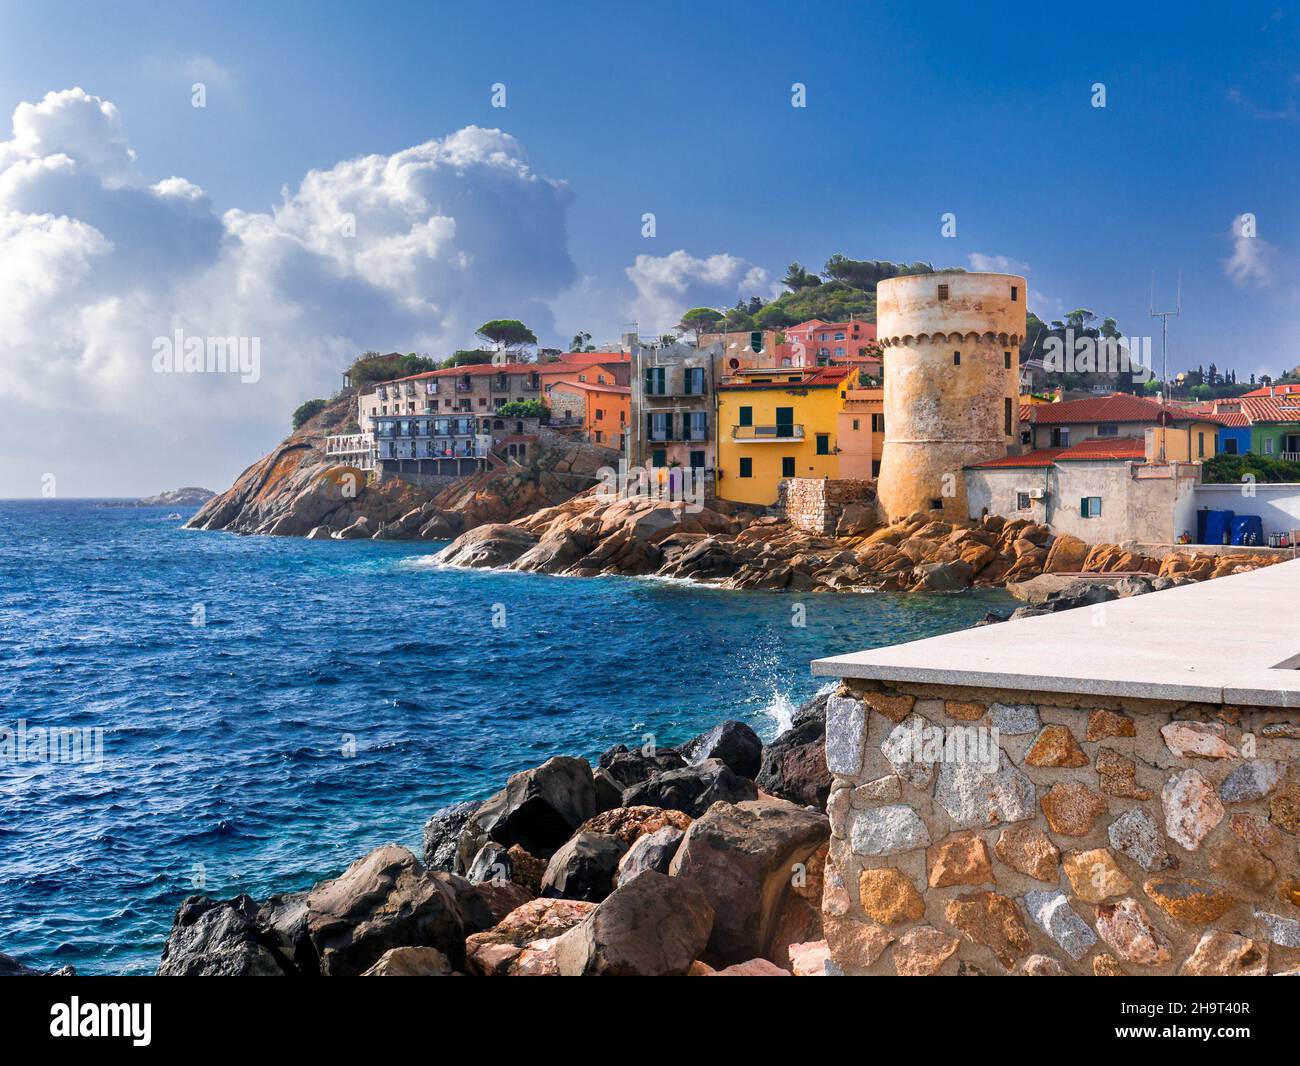 The perfect tiny seaside village of 'Giglio Porto' with multi colored houses, an ancient defensive tower and a rocky coastline against a deep blue Med Stock Photo